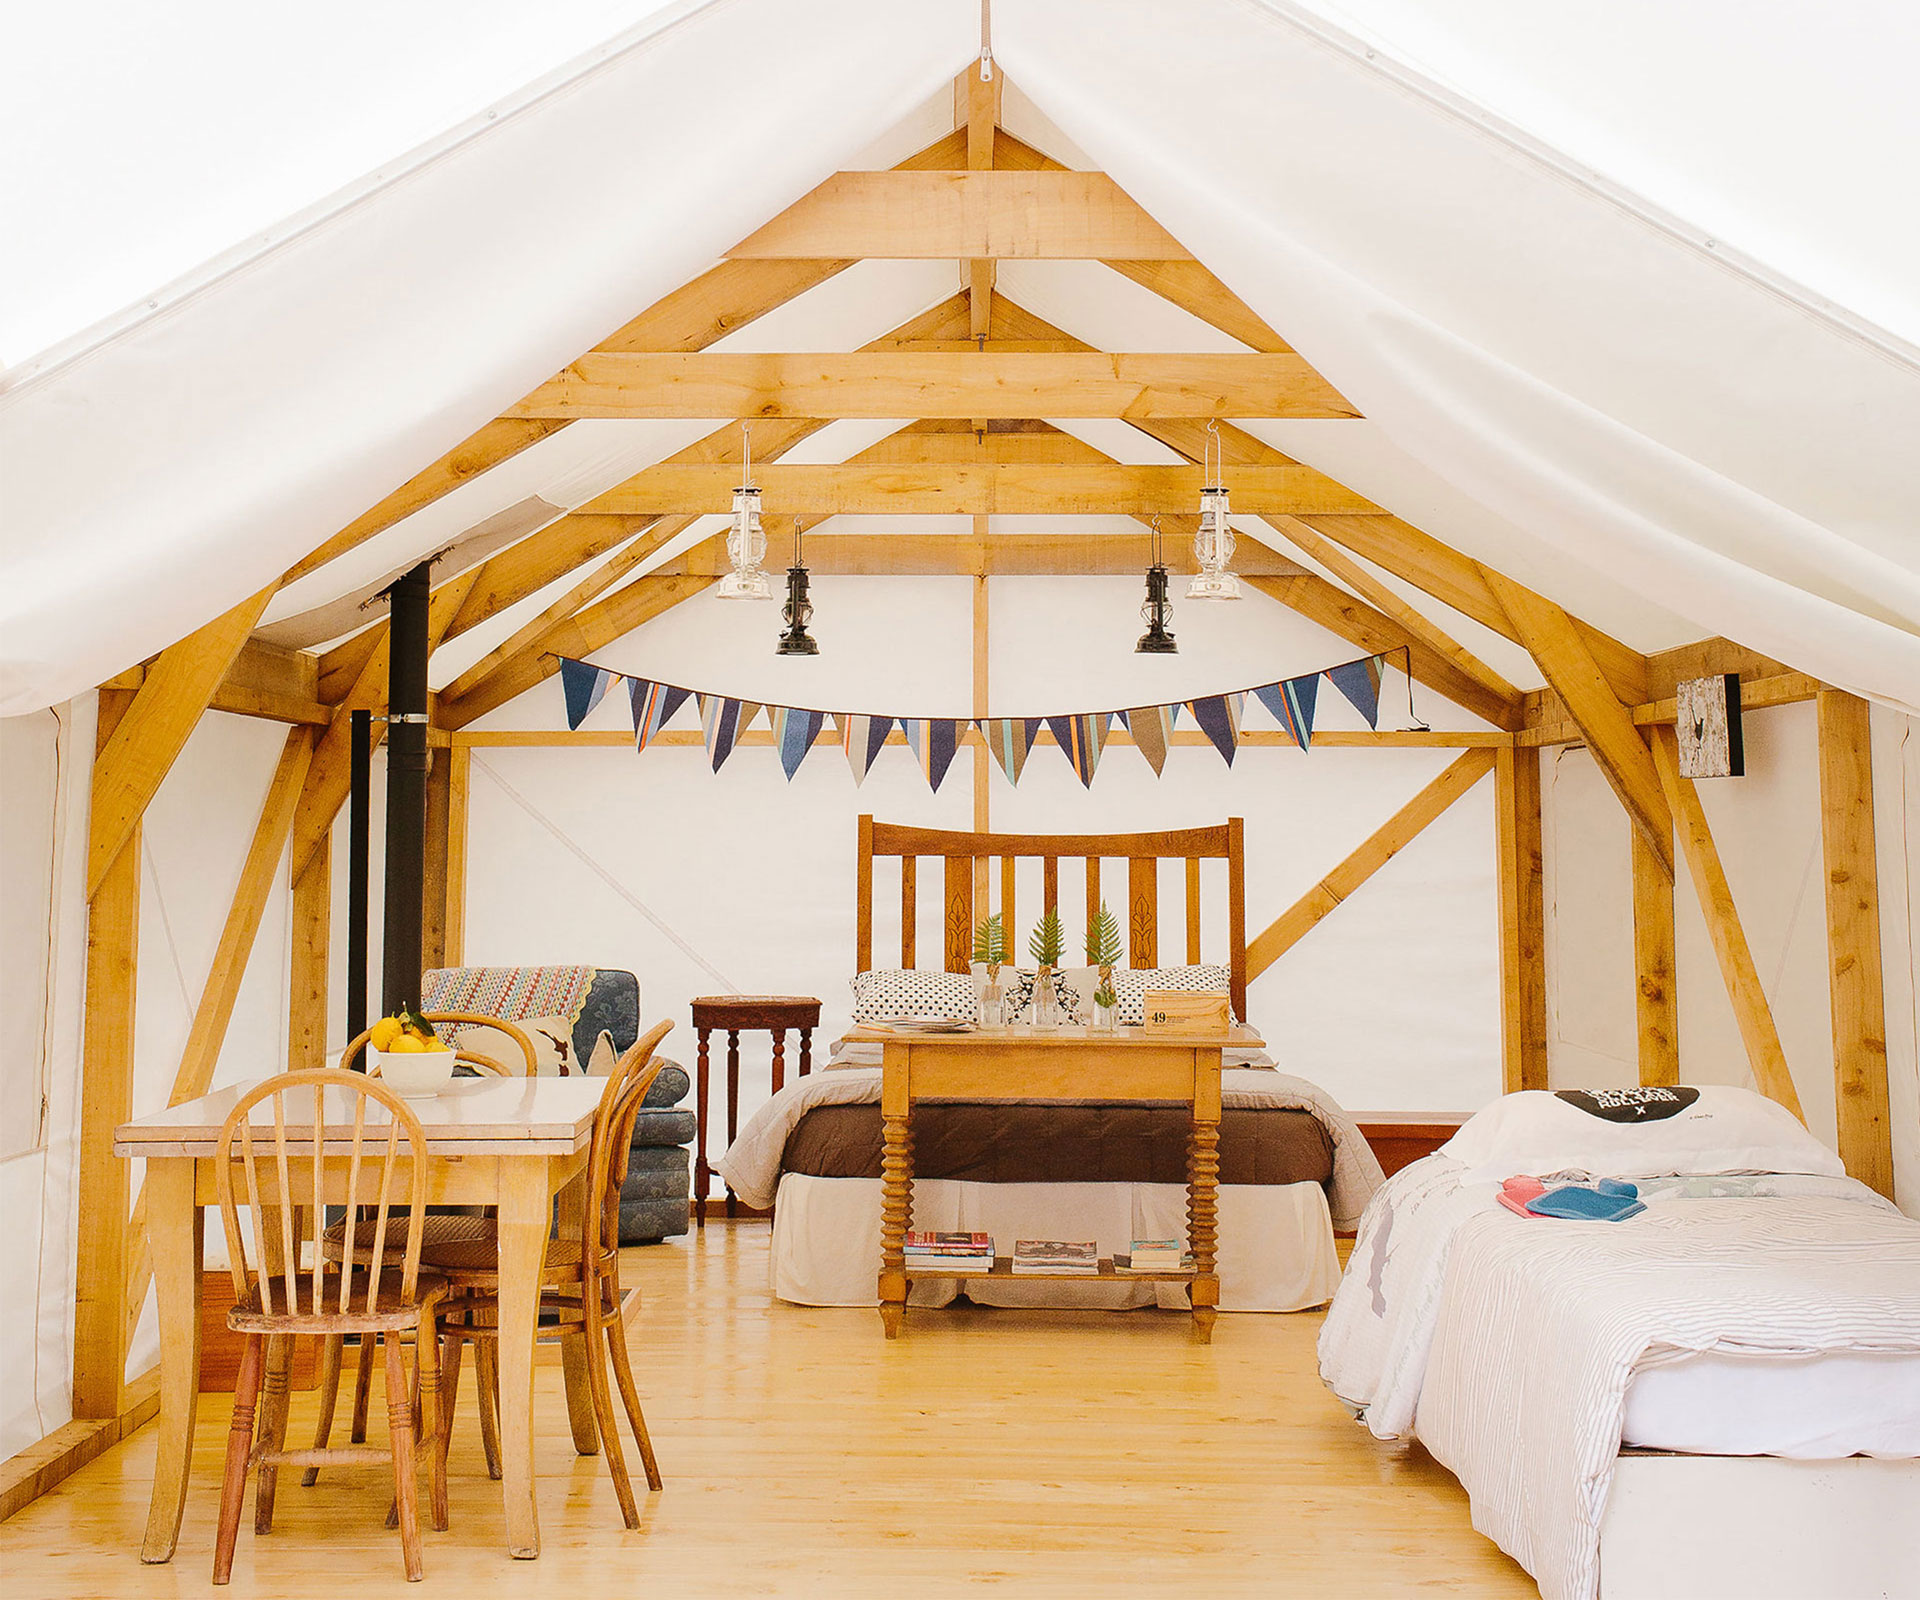 Baches for your budget: Glamping